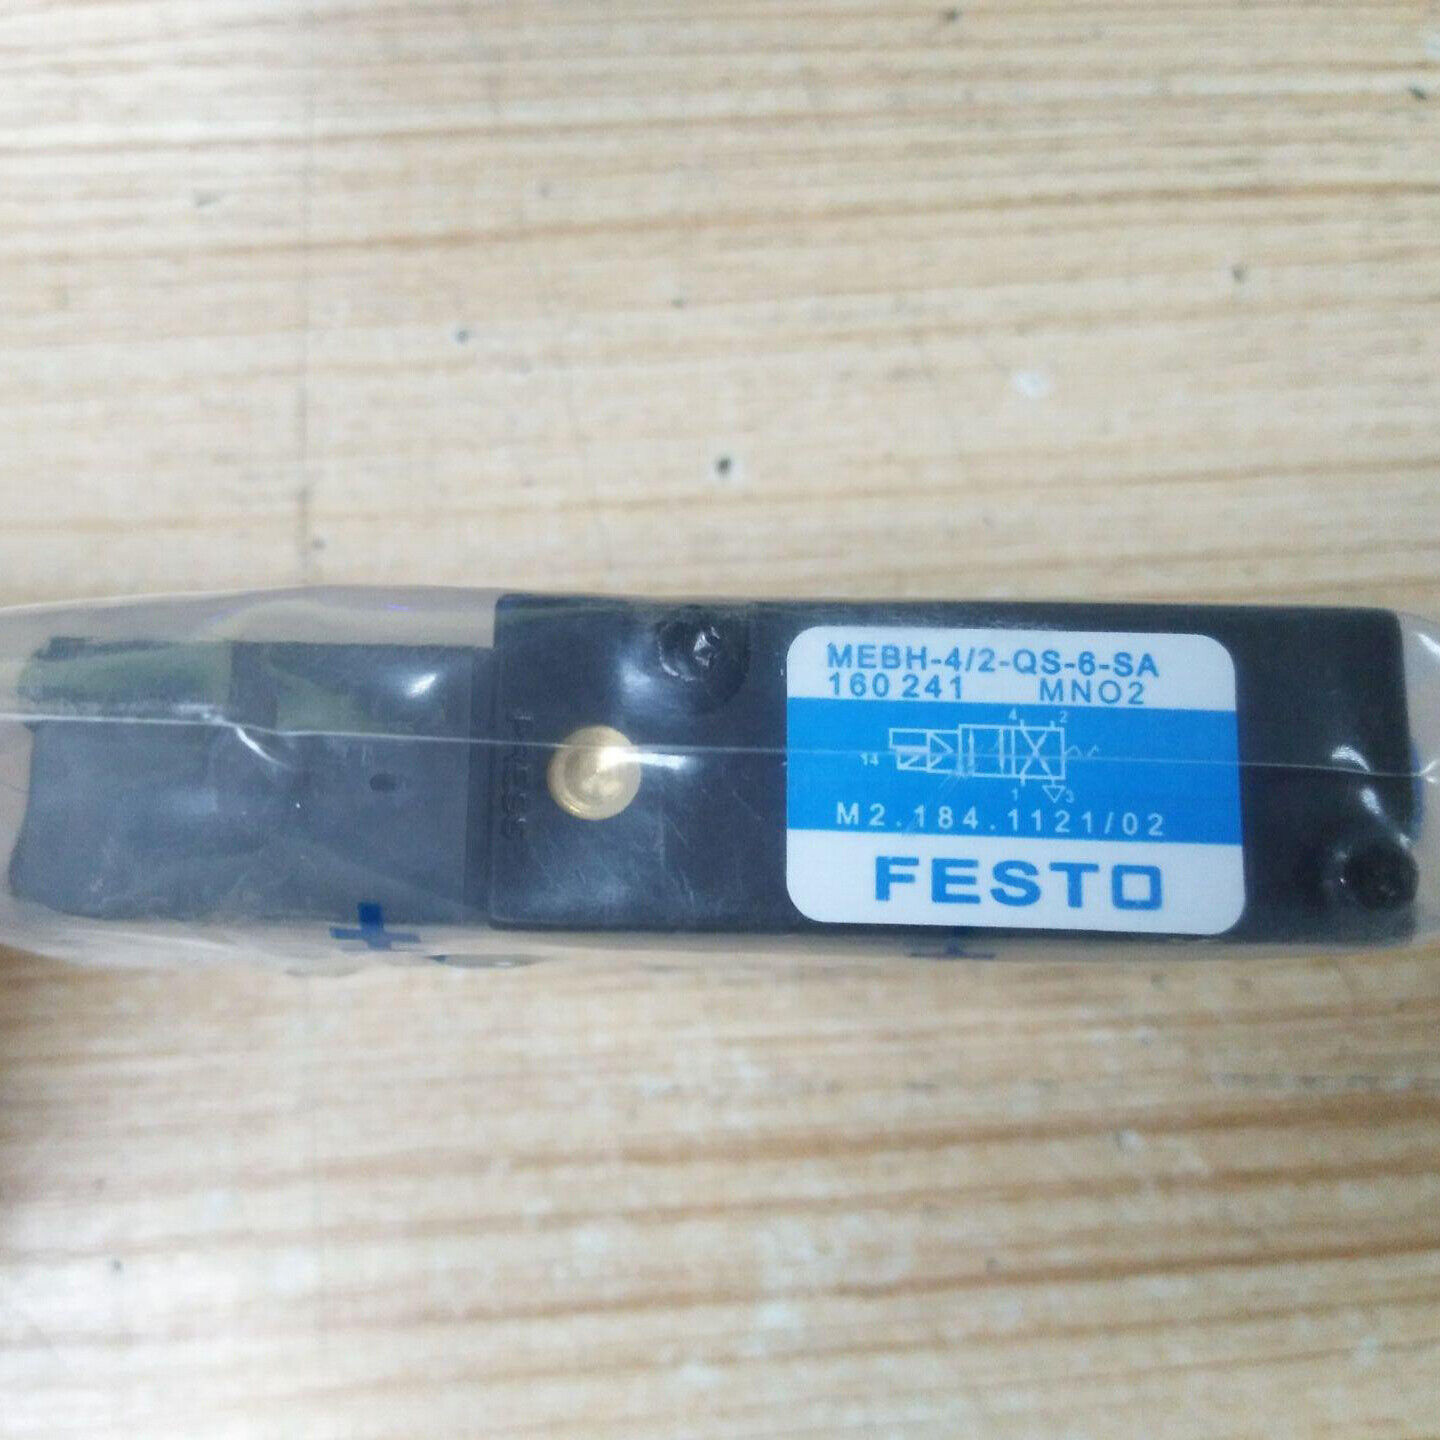 one brand New Festo MEBH-4/2-QS-6-SA solenoid valve Fast Delivery